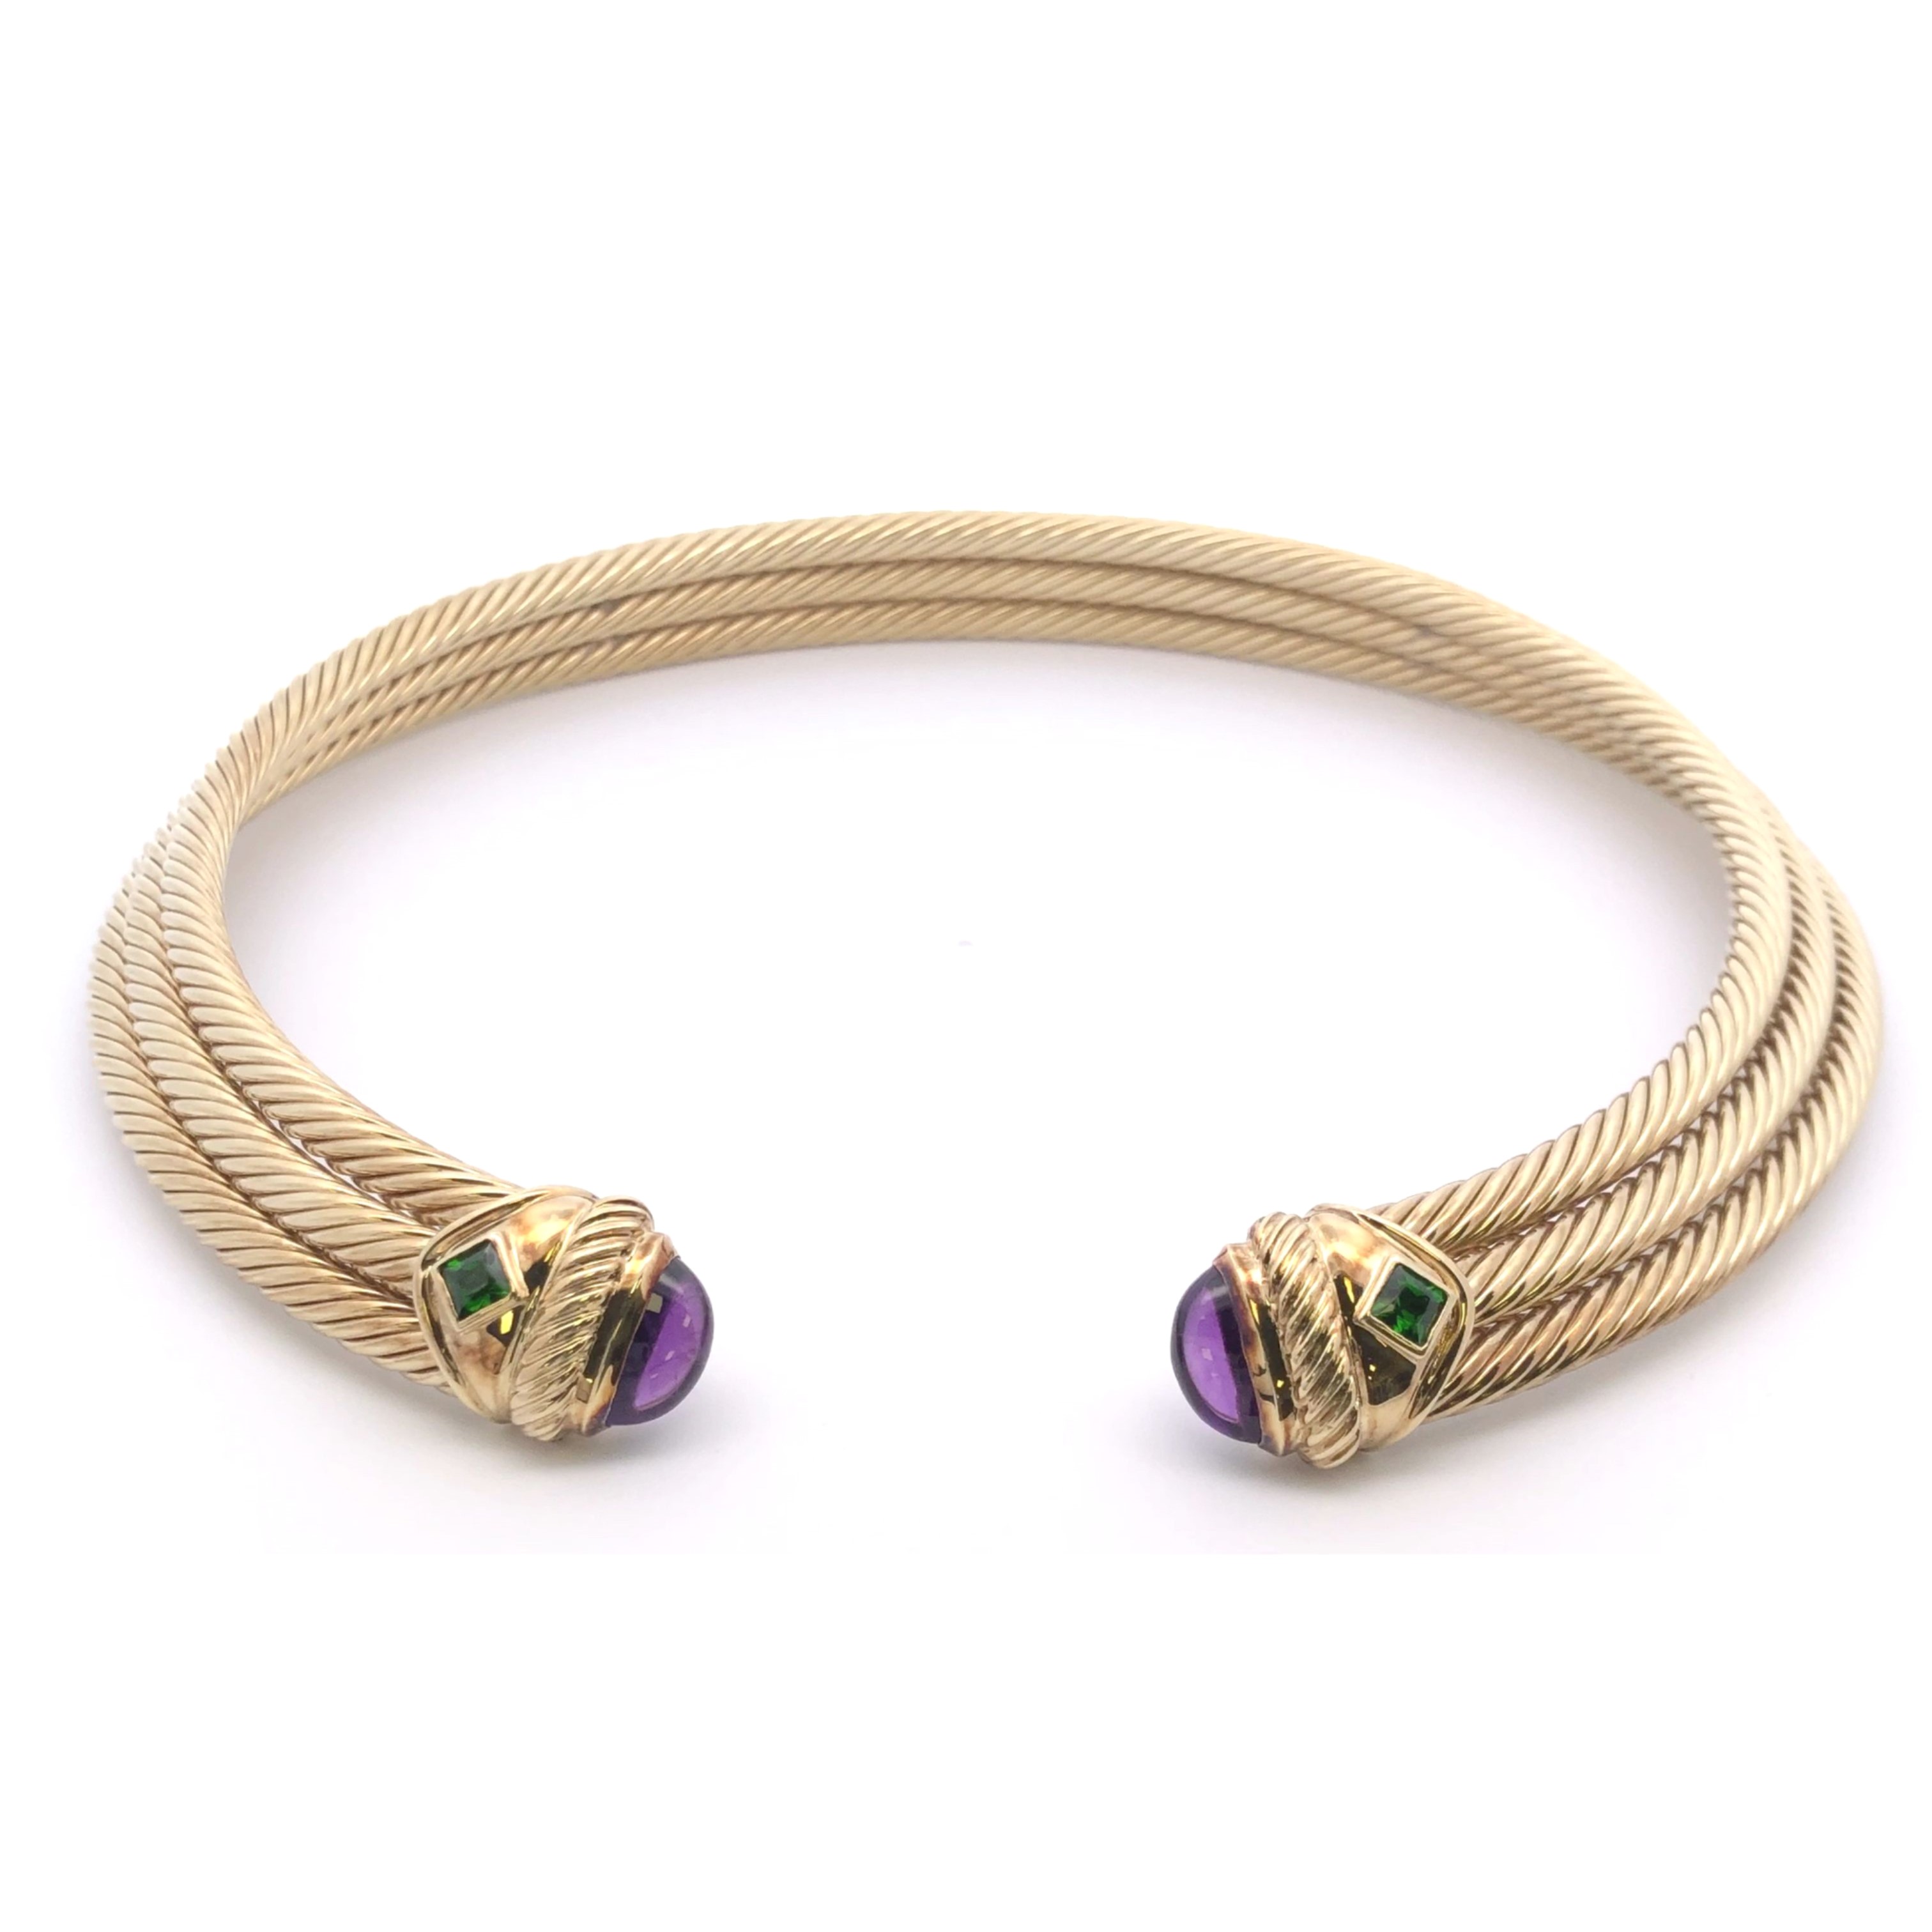 Estate David Yurman 14k Yellow Gold Cable Collar Necklace with Amethyst and Tsavorite